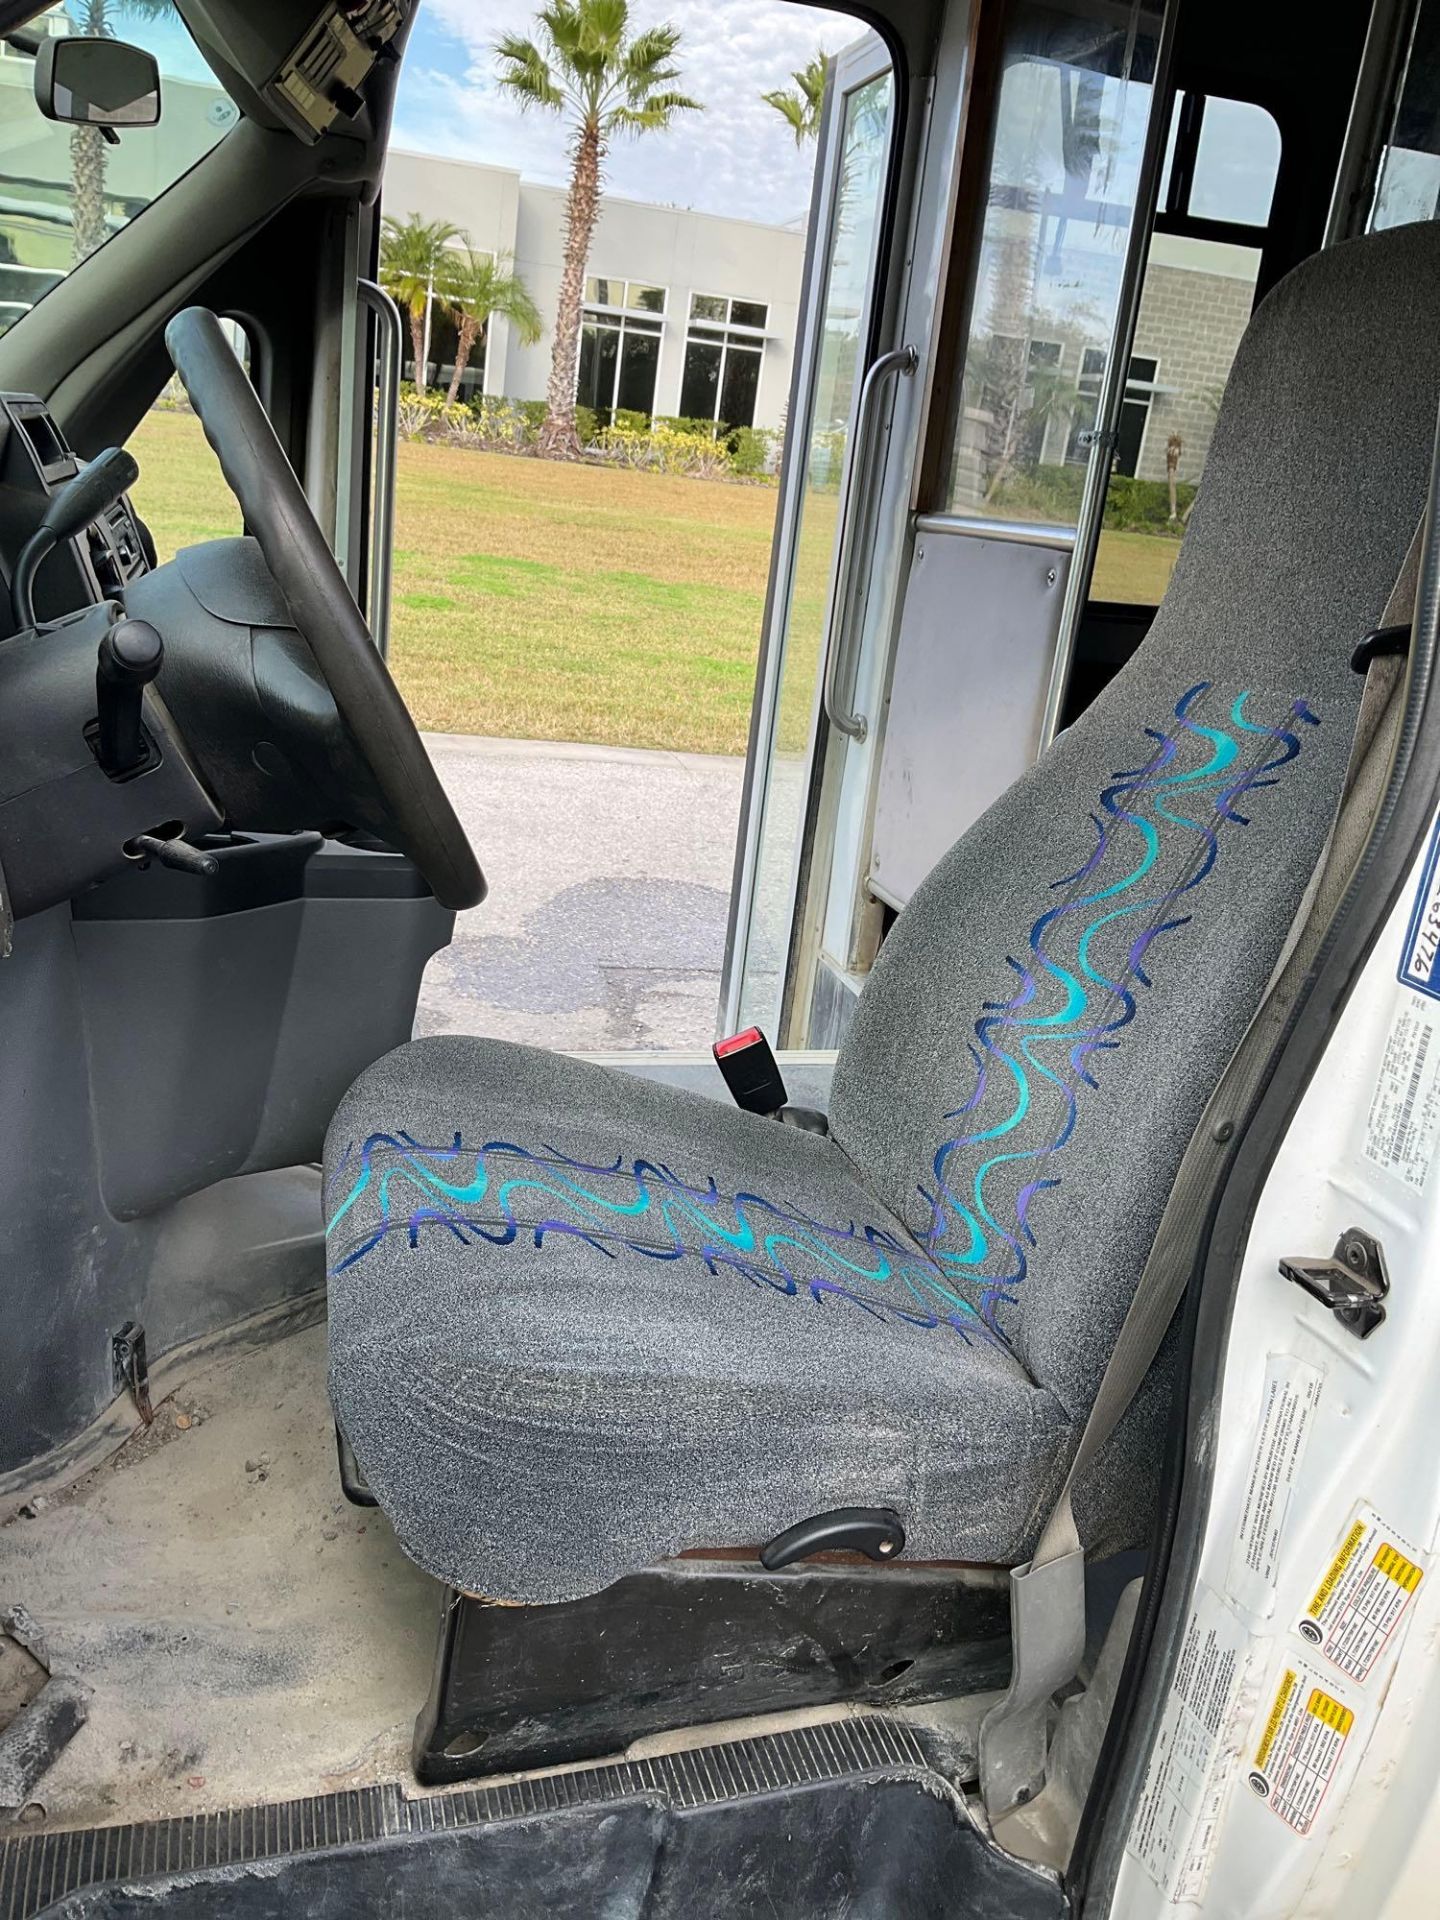 2018 FORD ECONOLINE 450 SHUTTLE BUS, GAS AUTOMATIC, 28 PASSENGER SEATING - Image 10 of 31